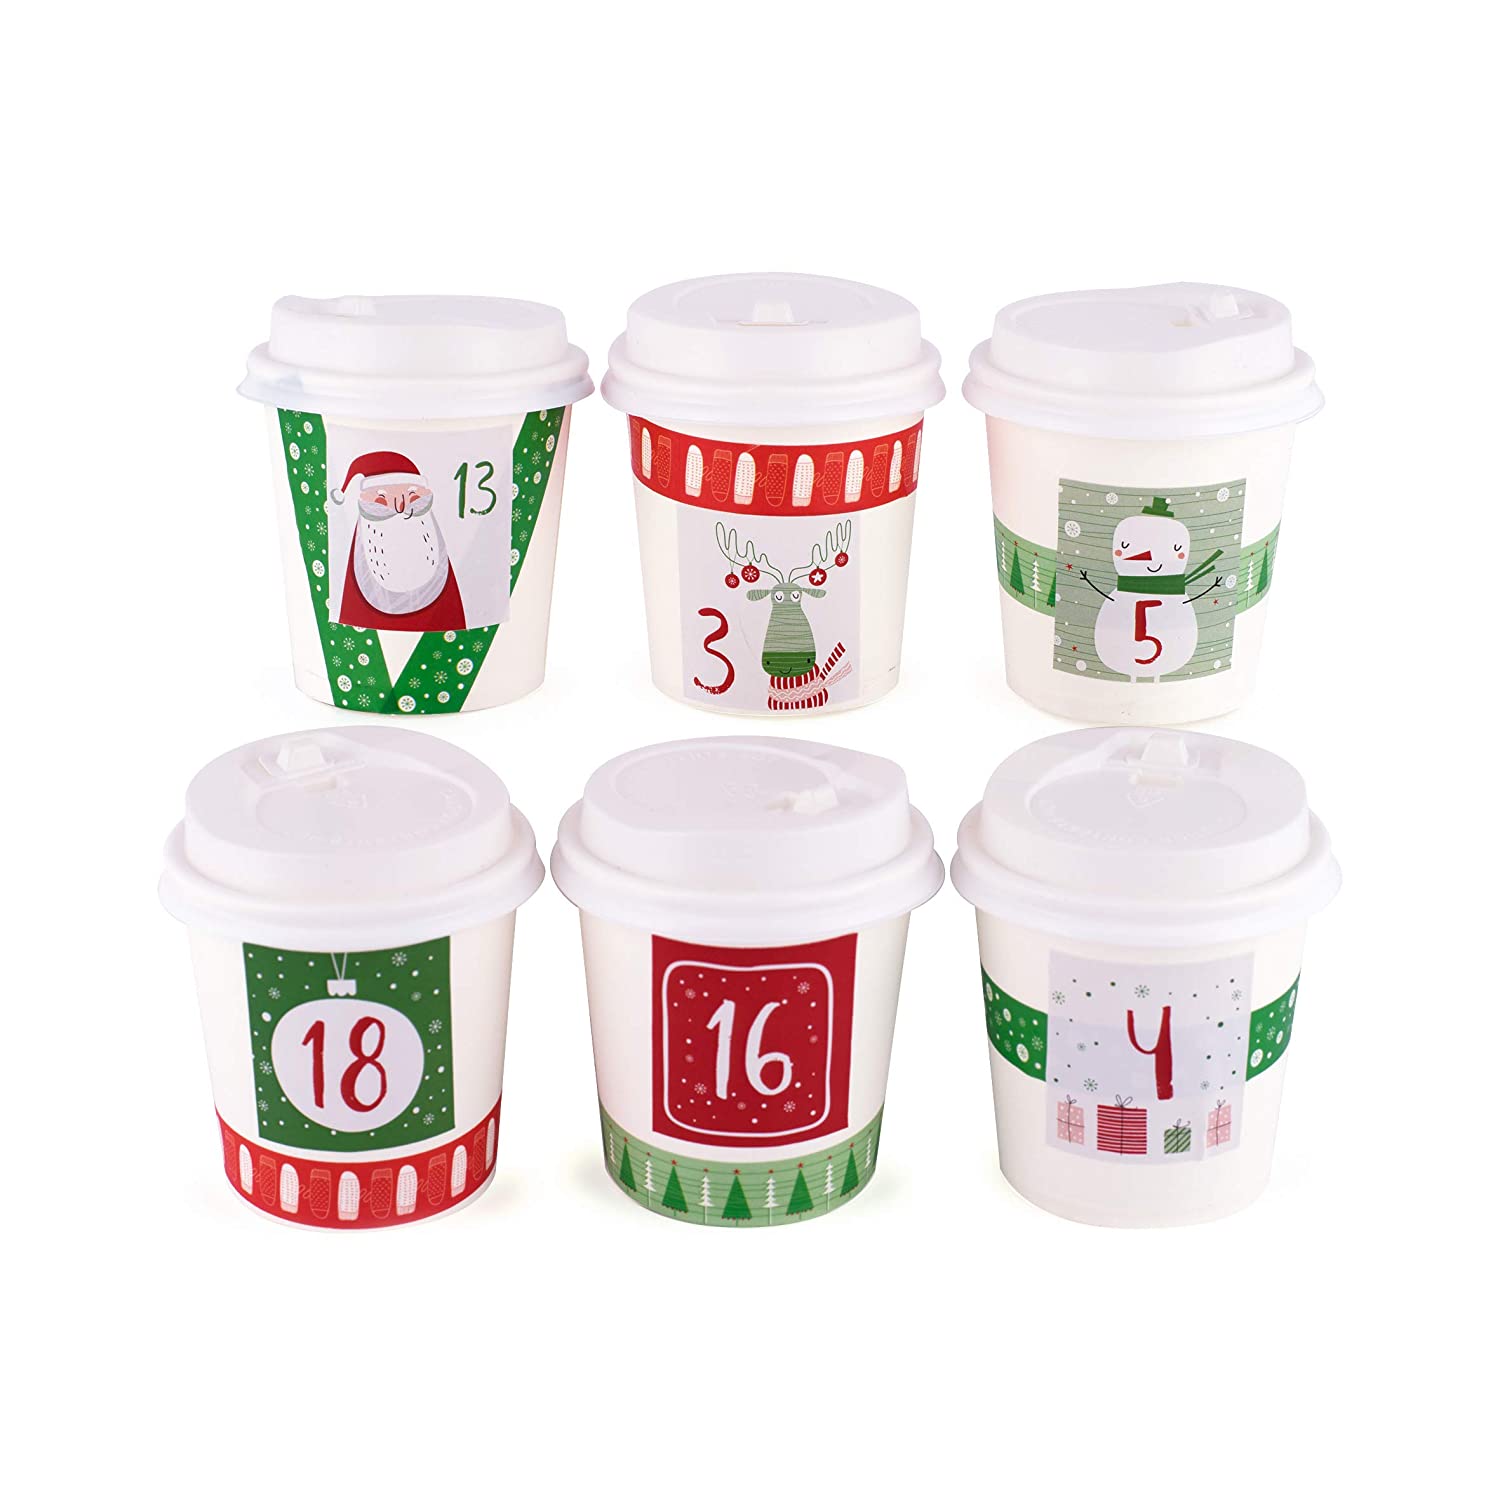 Pajoma Advent Calendar Cups, 24 Cups for Filling, incl. Stickers and accessories